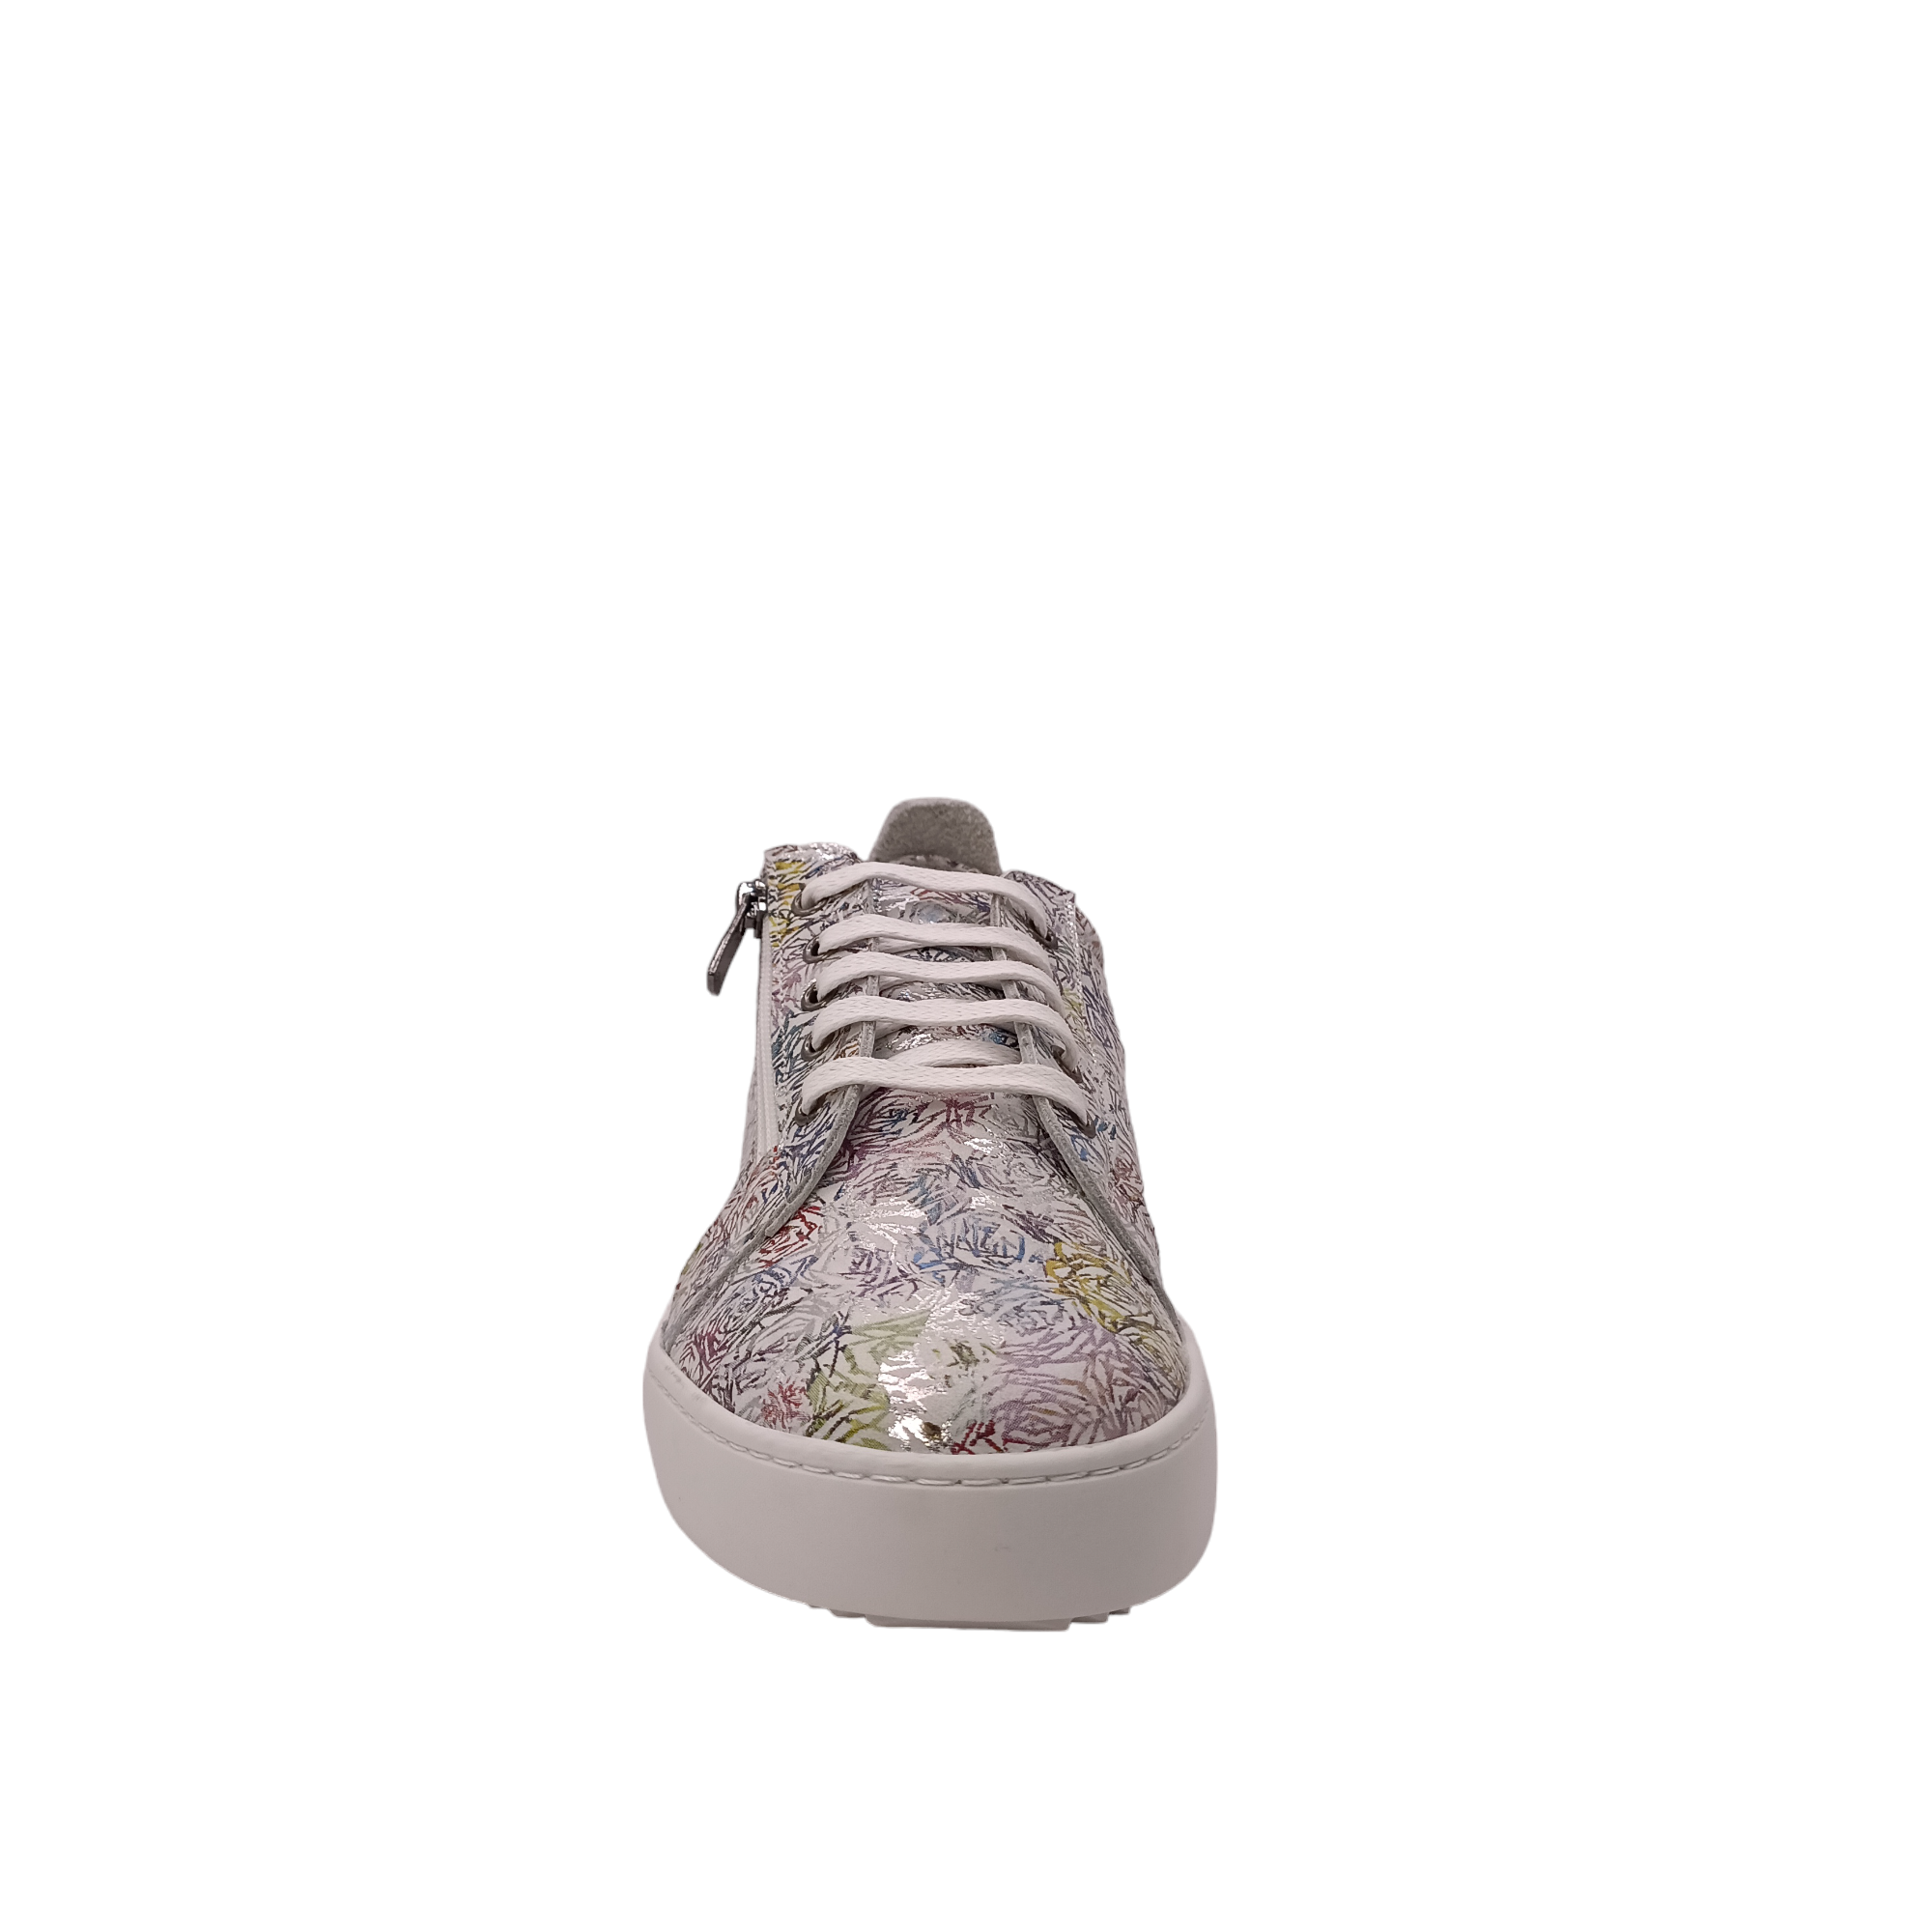 Side angle view of Tarzan Leather printed shoe with floral outlines, multi coloured print. White laces and sole. Shop Womens Rilassare Shoes Online and IN-store with shoe&me NZ